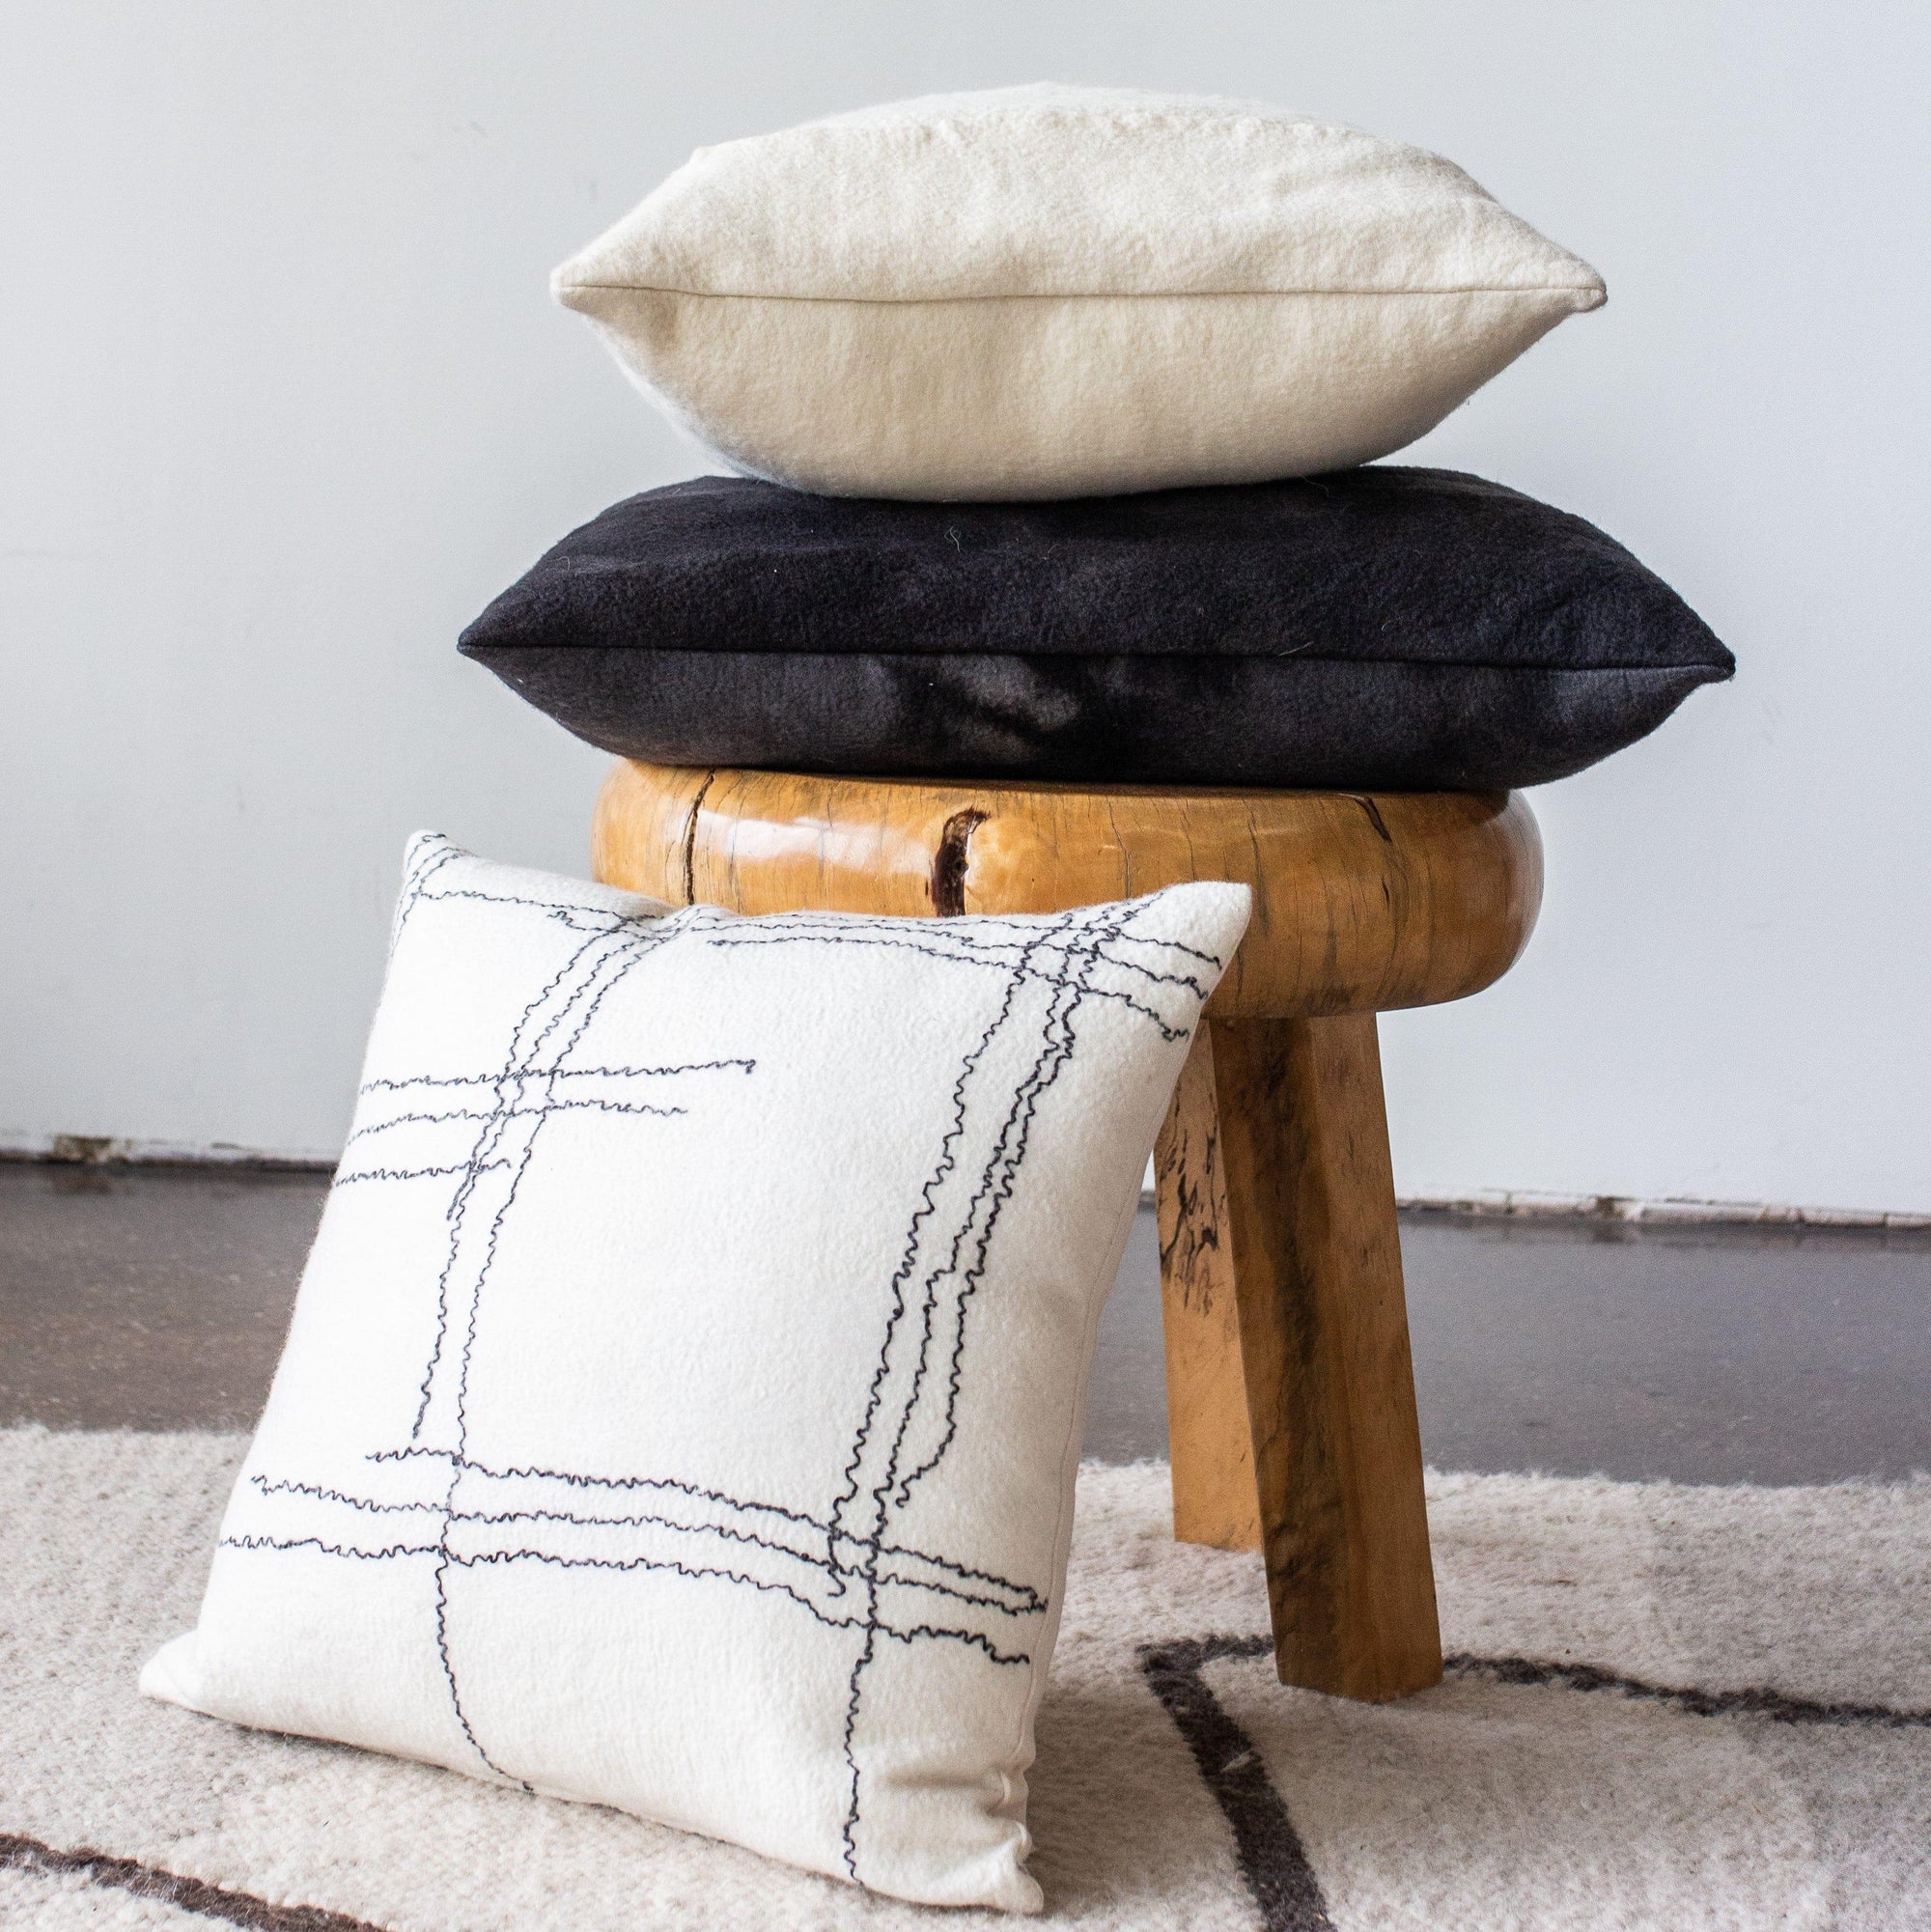 Linear Pillow kanju interiors African décor handmade natural organic color accent pillow cushion throw decorative lounge comfortable comfy unique modern contemporary stylish soft accent durable minimal couch chair bed luxury hand made home good gift hand felted felt merino wool hand dyed felting jagged layers one of a kind charcoal dark gray cream off white lines mohair yarn